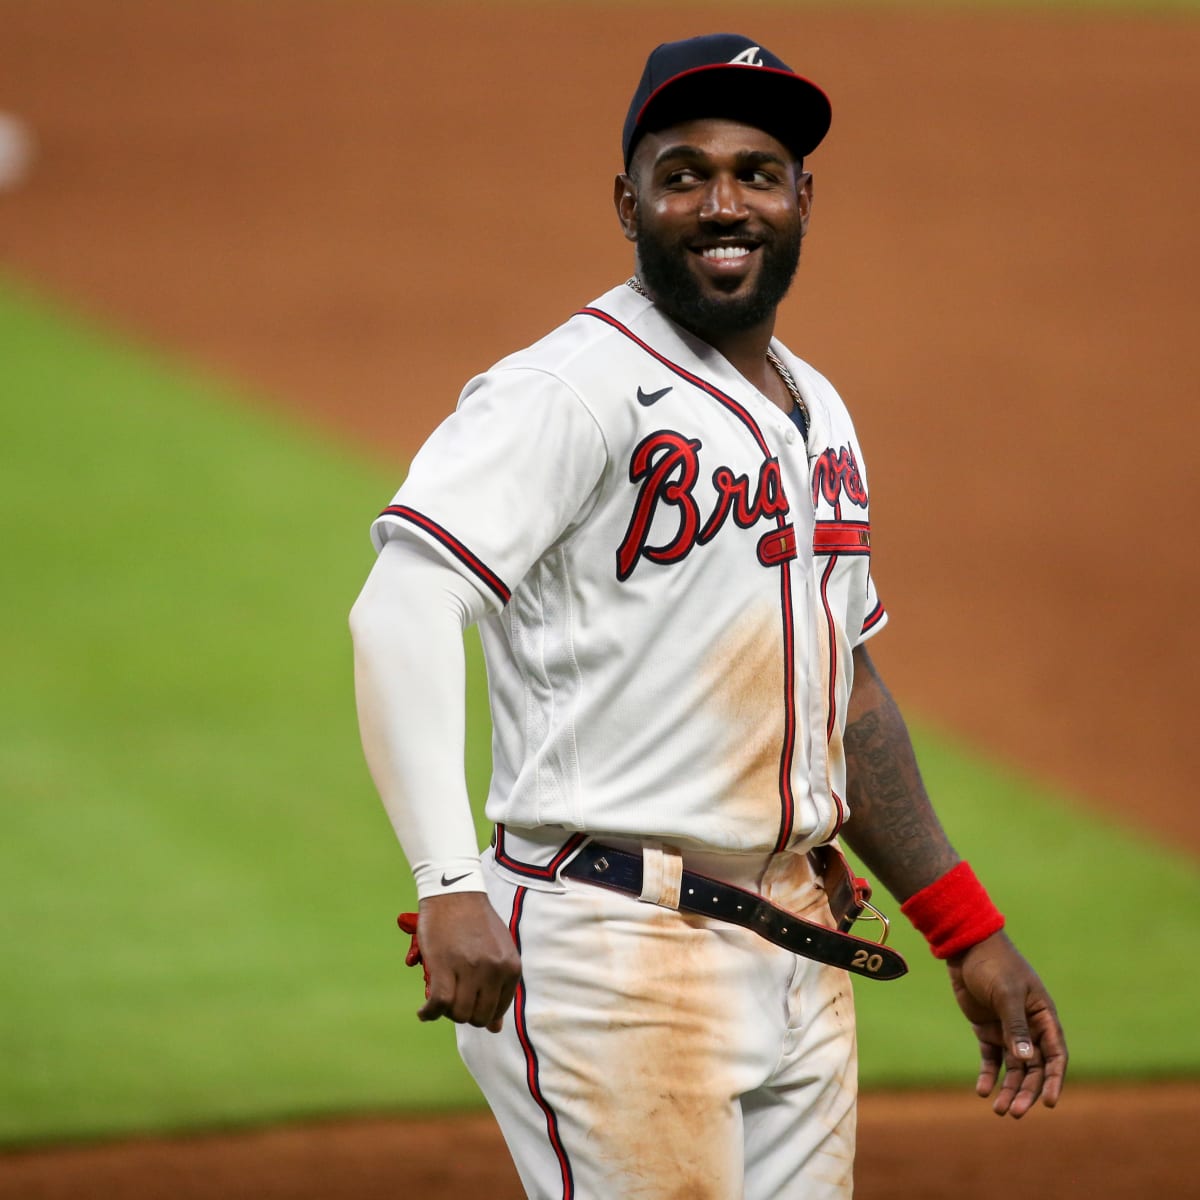 Atlanta Braves outfielder Marcell Ozuna off to a great start in